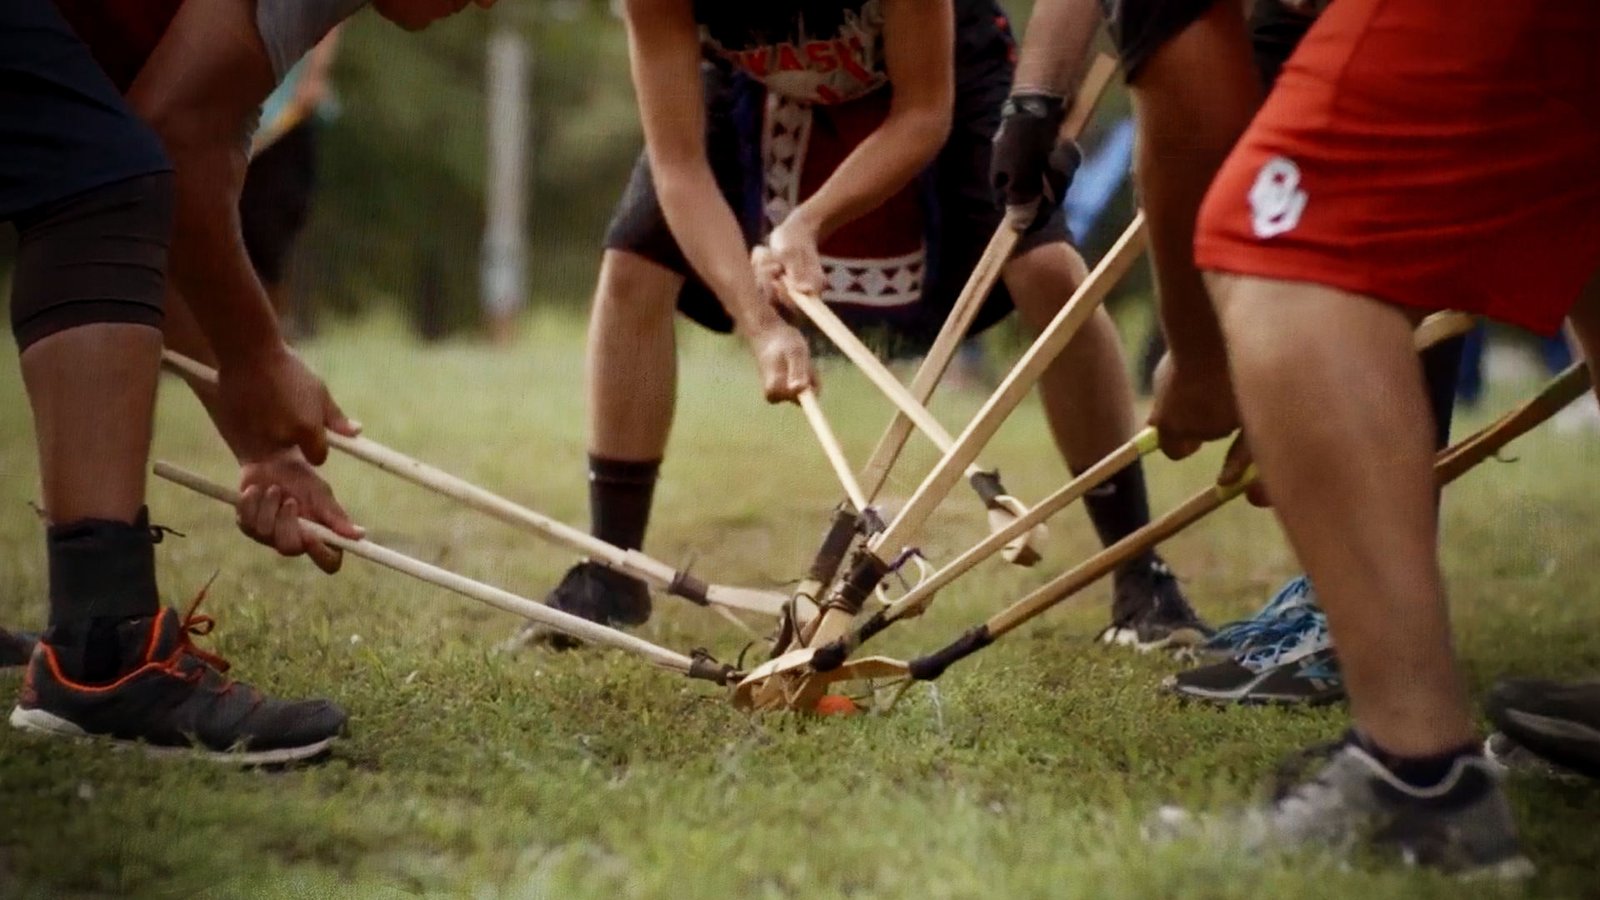 The Ancient Indigenous North American Stickball Game